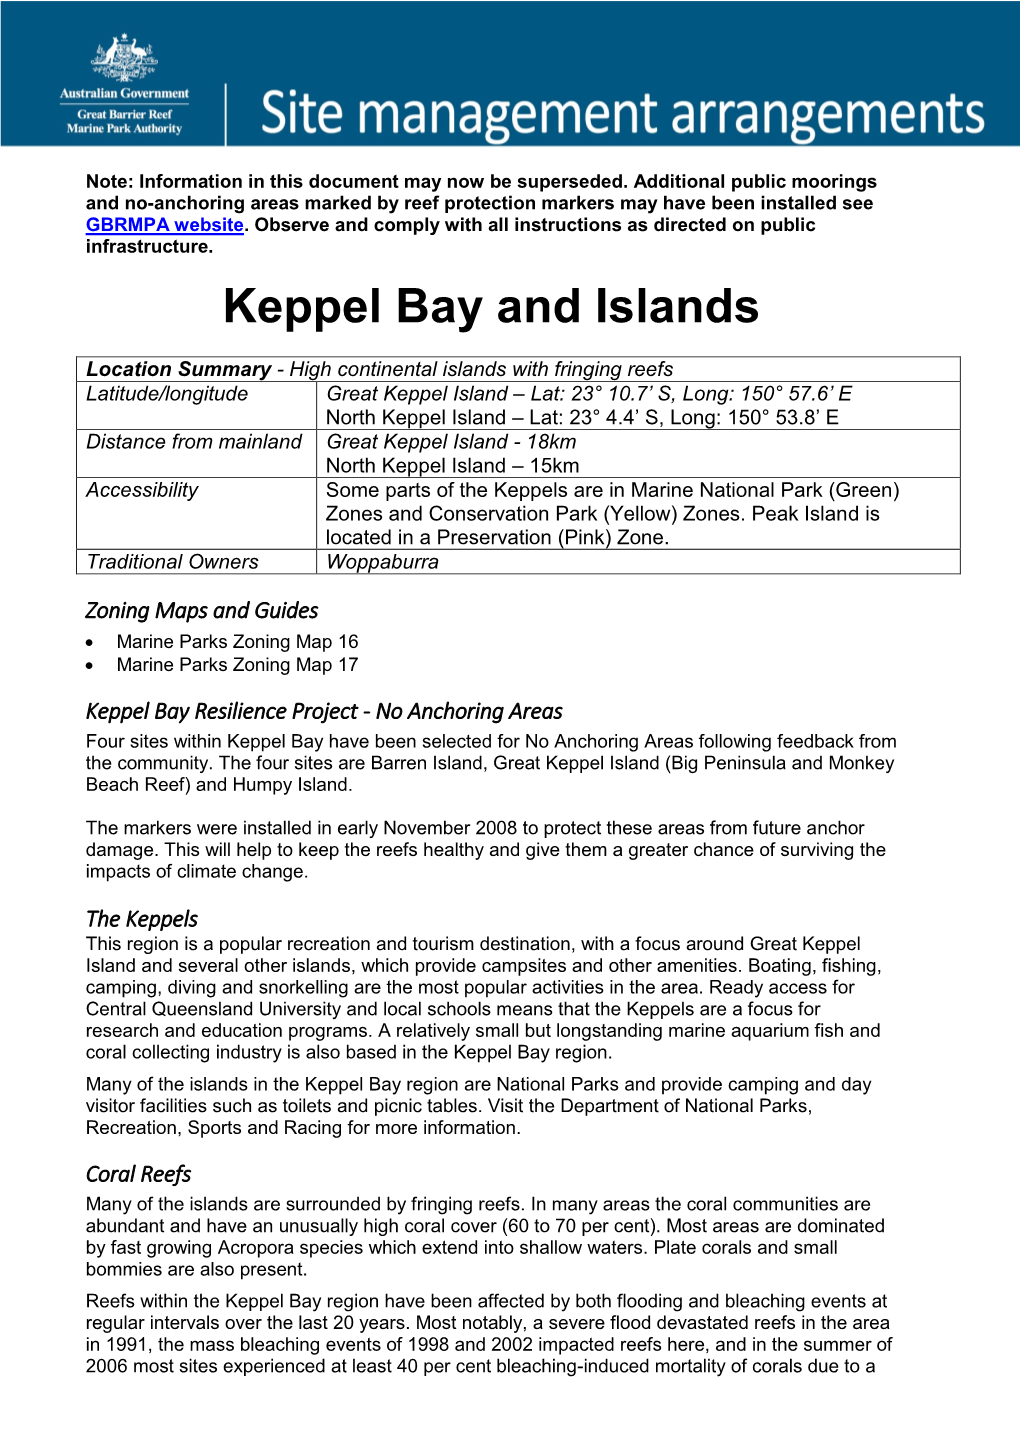 Keppel Bay and Islands